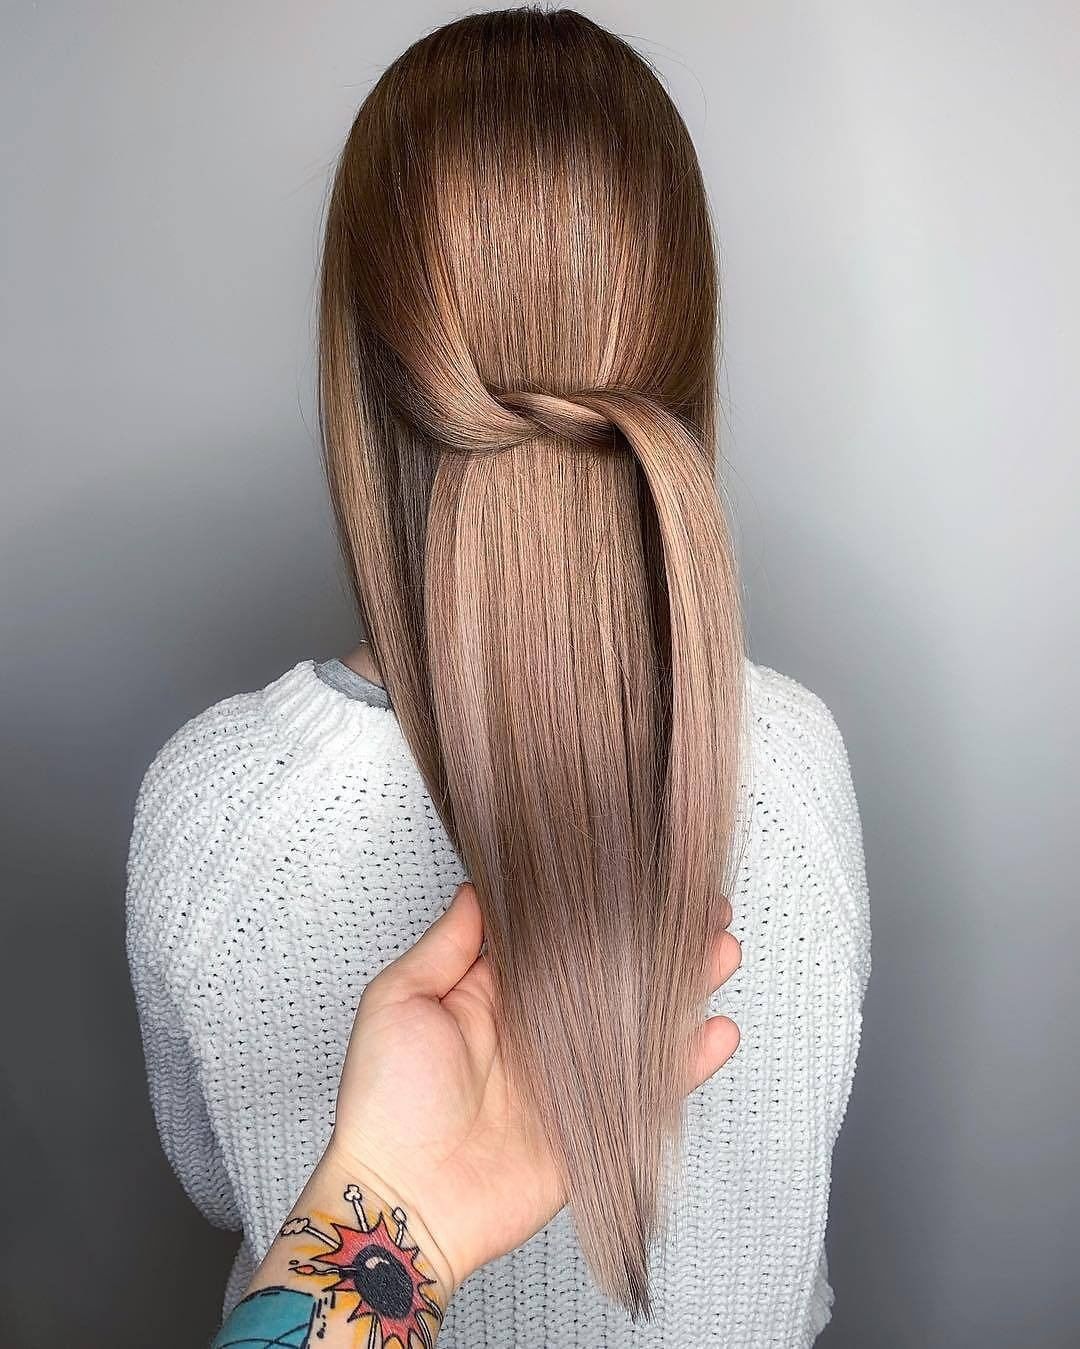 Schwarzkopf Professional - Just LOOK at these tones! 💕
*Formula* 👉 @damianheleniak_hair Lifted with #BLONDME Bond Enforcing Premium Lightener 9+ before toning with #IGORAVIBRANCE: 7/46 + 6/62 with 5%...